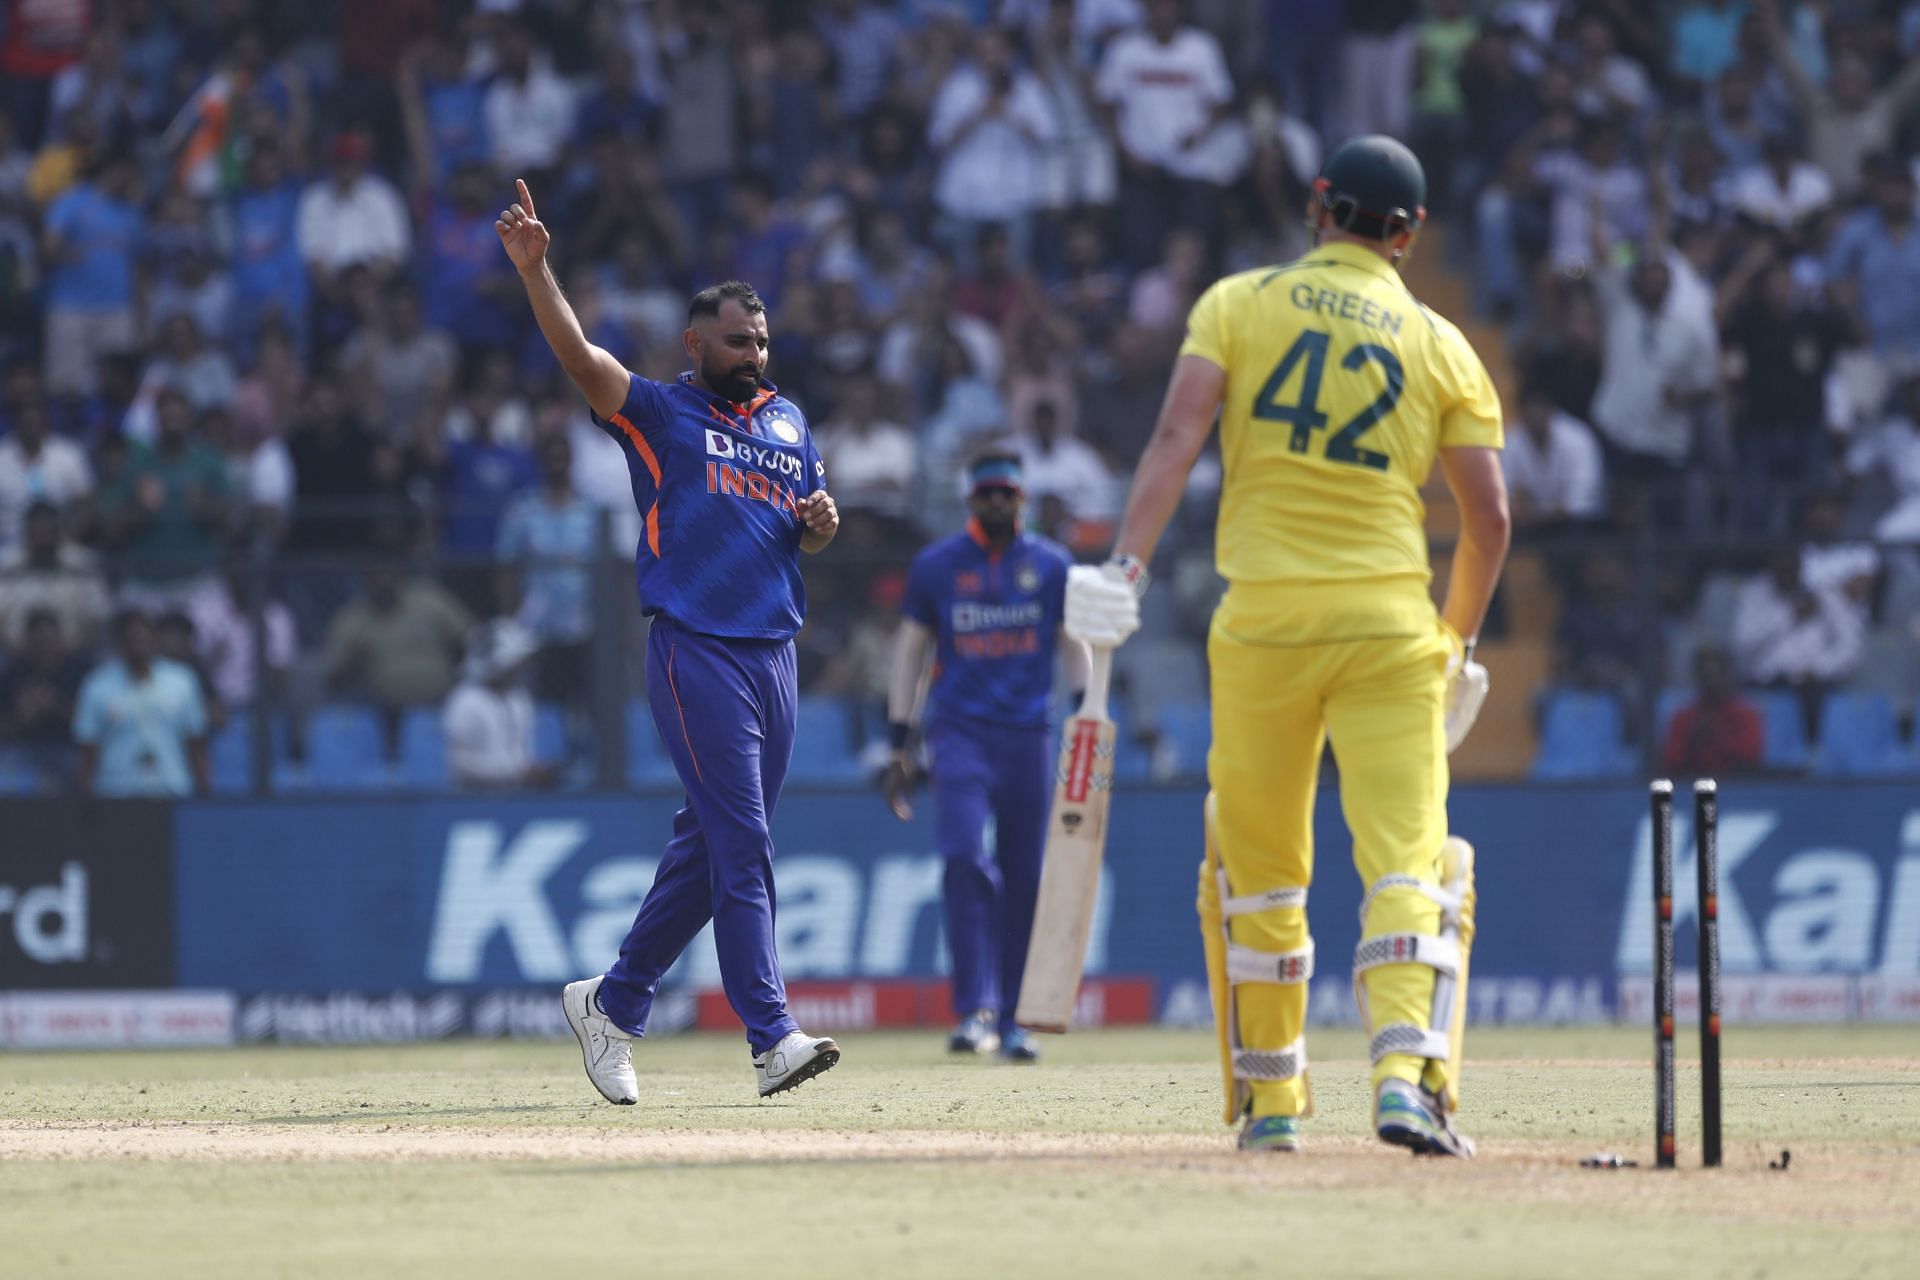 Mohammed Shami celebrates a wicket. (Credits: Getty)